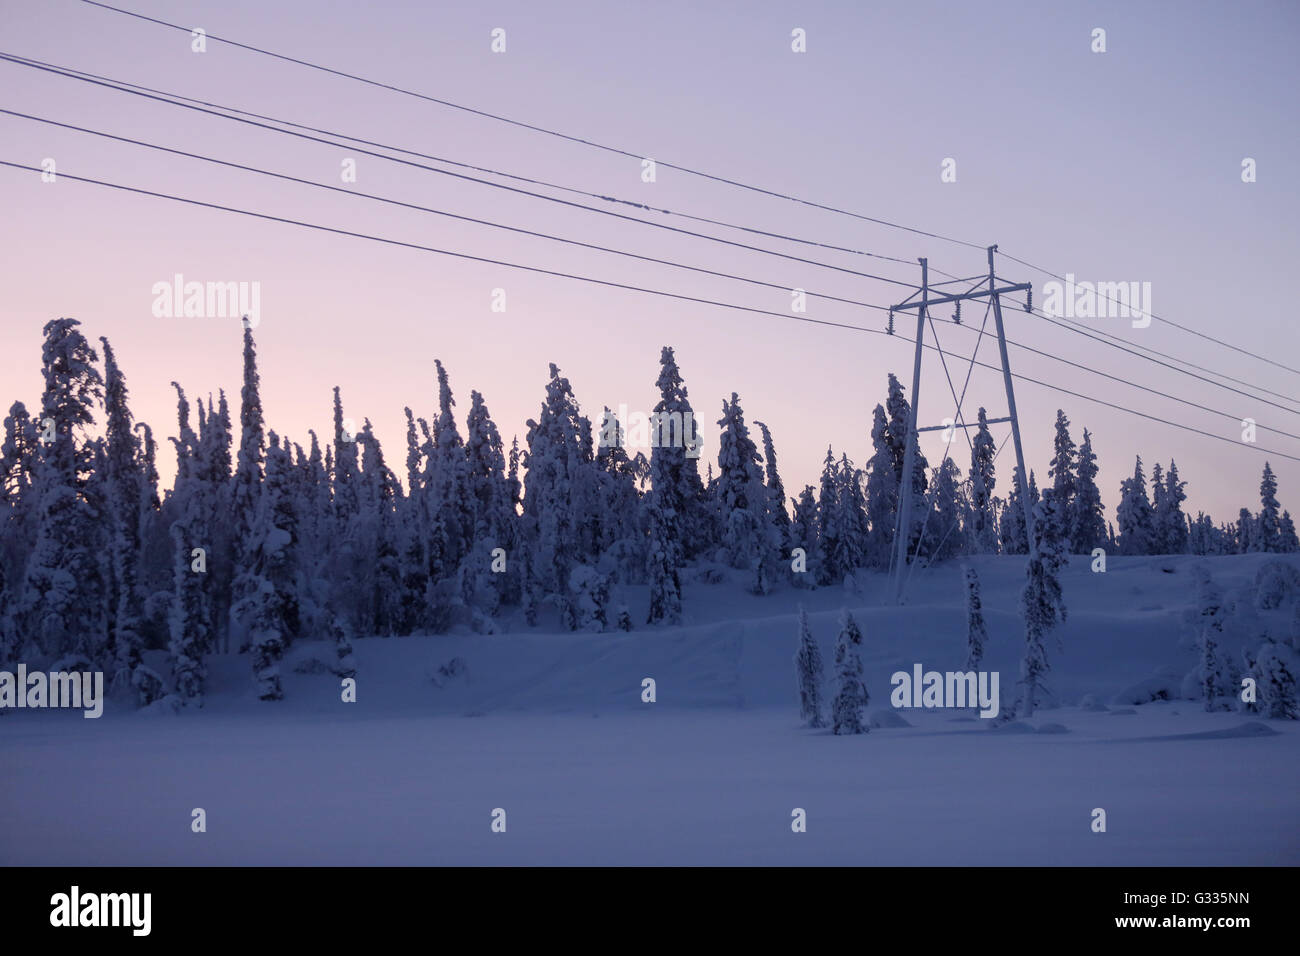 ?k skero, Finland, frozen power lines and utility pole at dusk Stock Photo